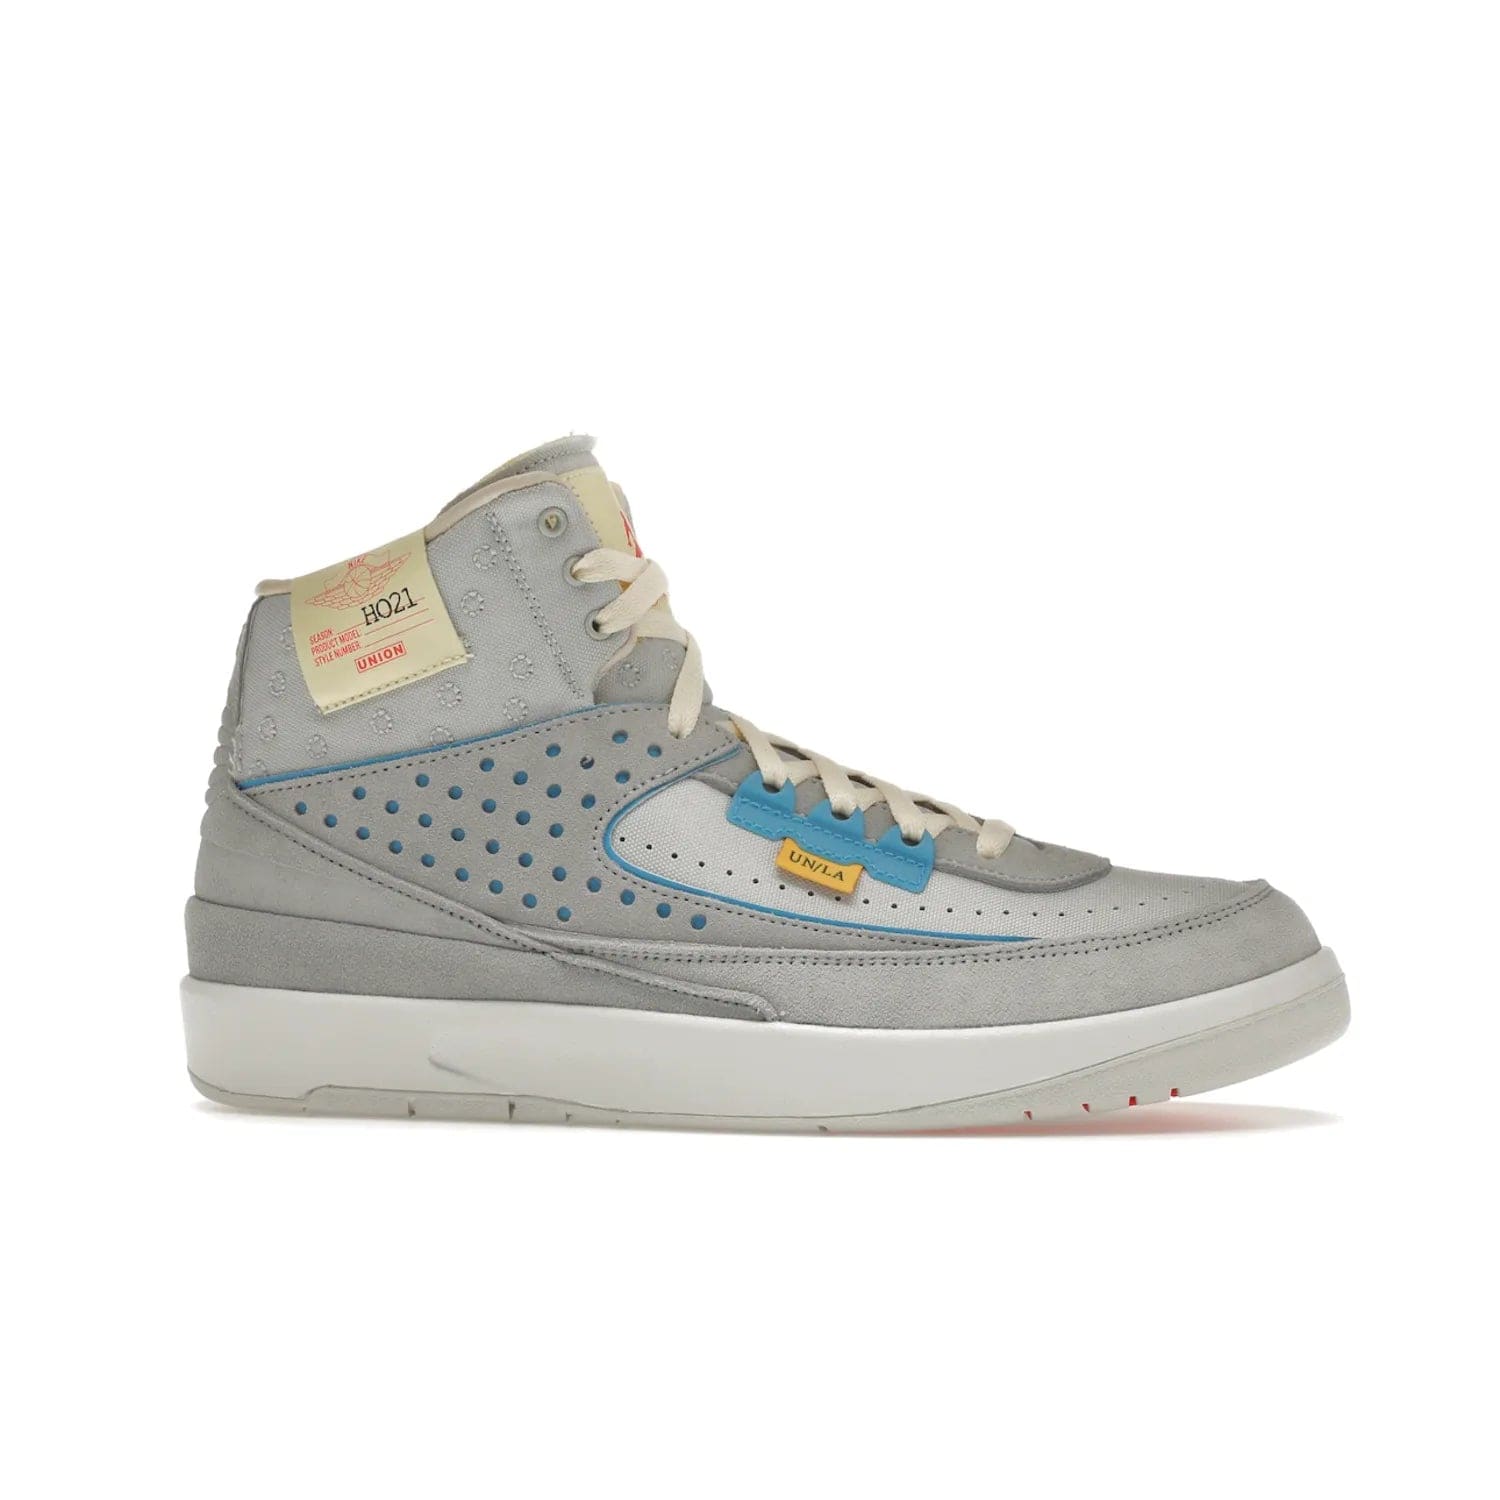 Jordan 2 Retro SP Union Grey Fog - Image 2 - Only at www.BallersClubKickz.com - Introducing the Air Jordan 2 Retro SP Union Grey Fog. This intricate sneaker design features a grey canvas upper with light blue eyelets, eyestay patches, and piping, plus custom external tags. Dropping in April 2022, this exclusive release offers a worn-in look and feel.